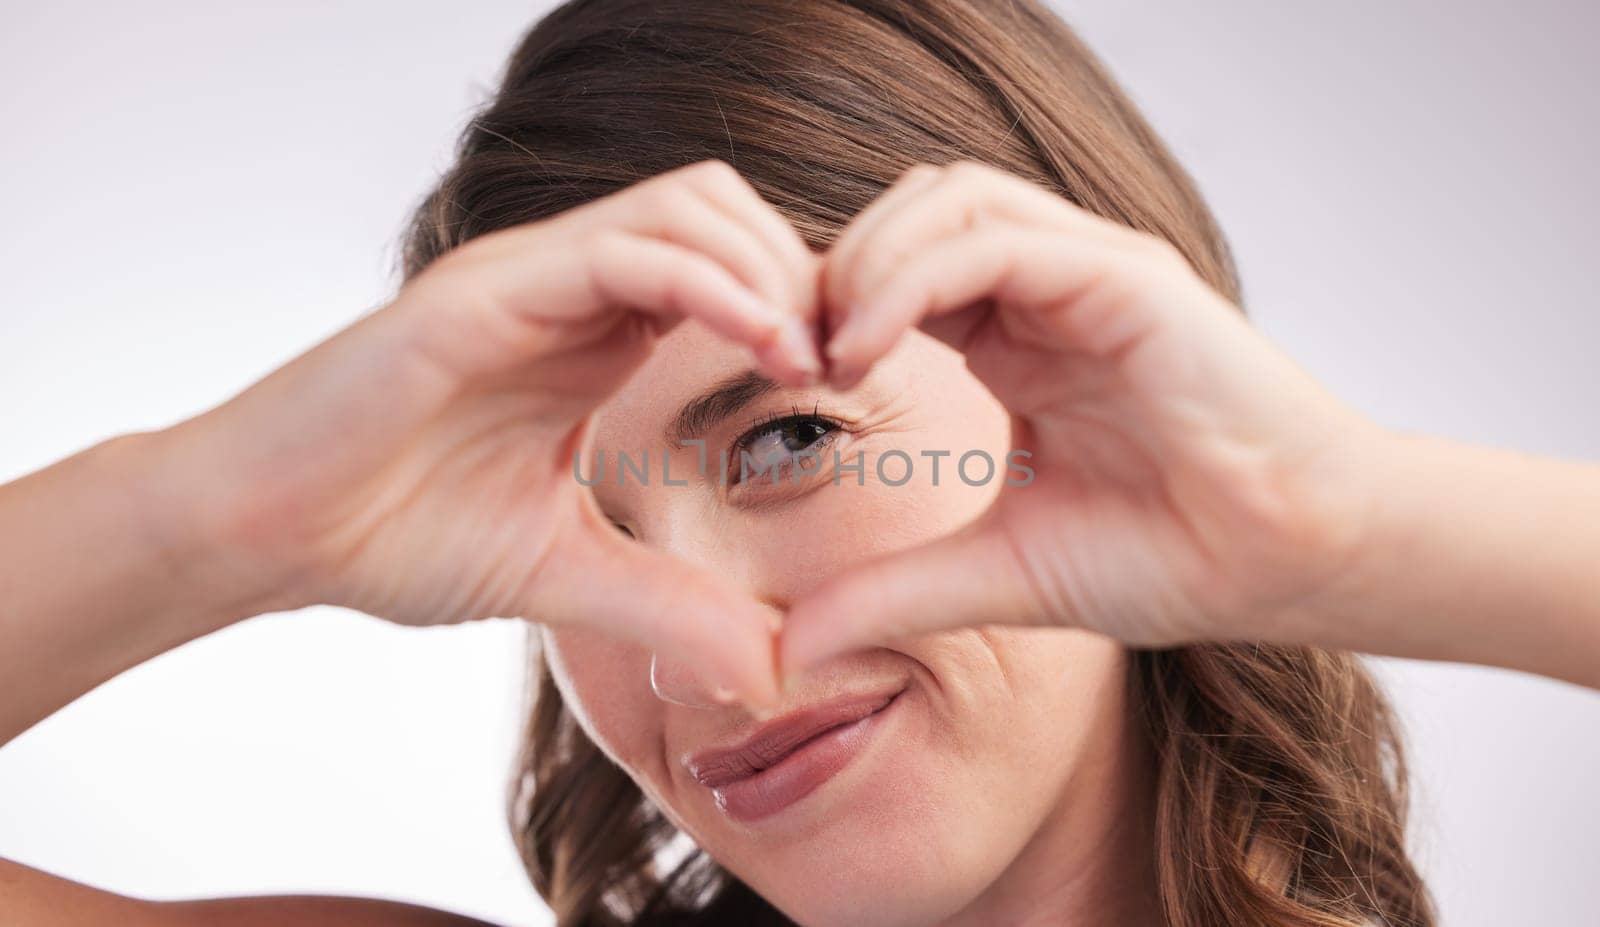 Woman, heart hands and sign for love in portrait, donation or charity with wellness and care on white background. Emoji, shape and romance gesture with thank you, feedback or reaction in studio.